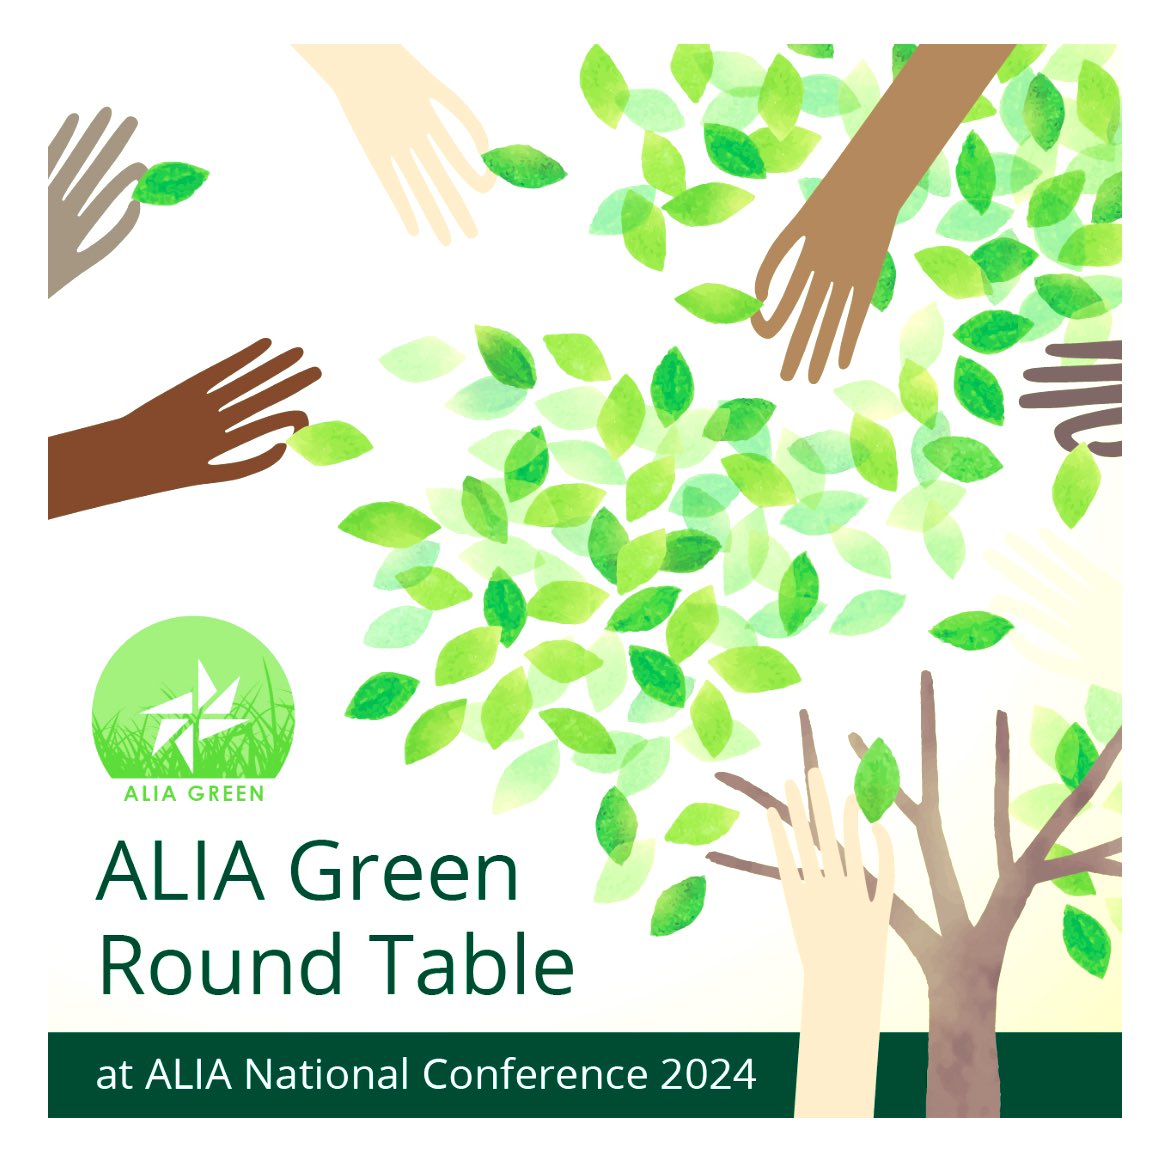 Do you care about the planet? Are you passionate about #libraries and #sustainability? Then join us @ALIANational #conference for a round table discussion about #GreenLibraries and how to become one!